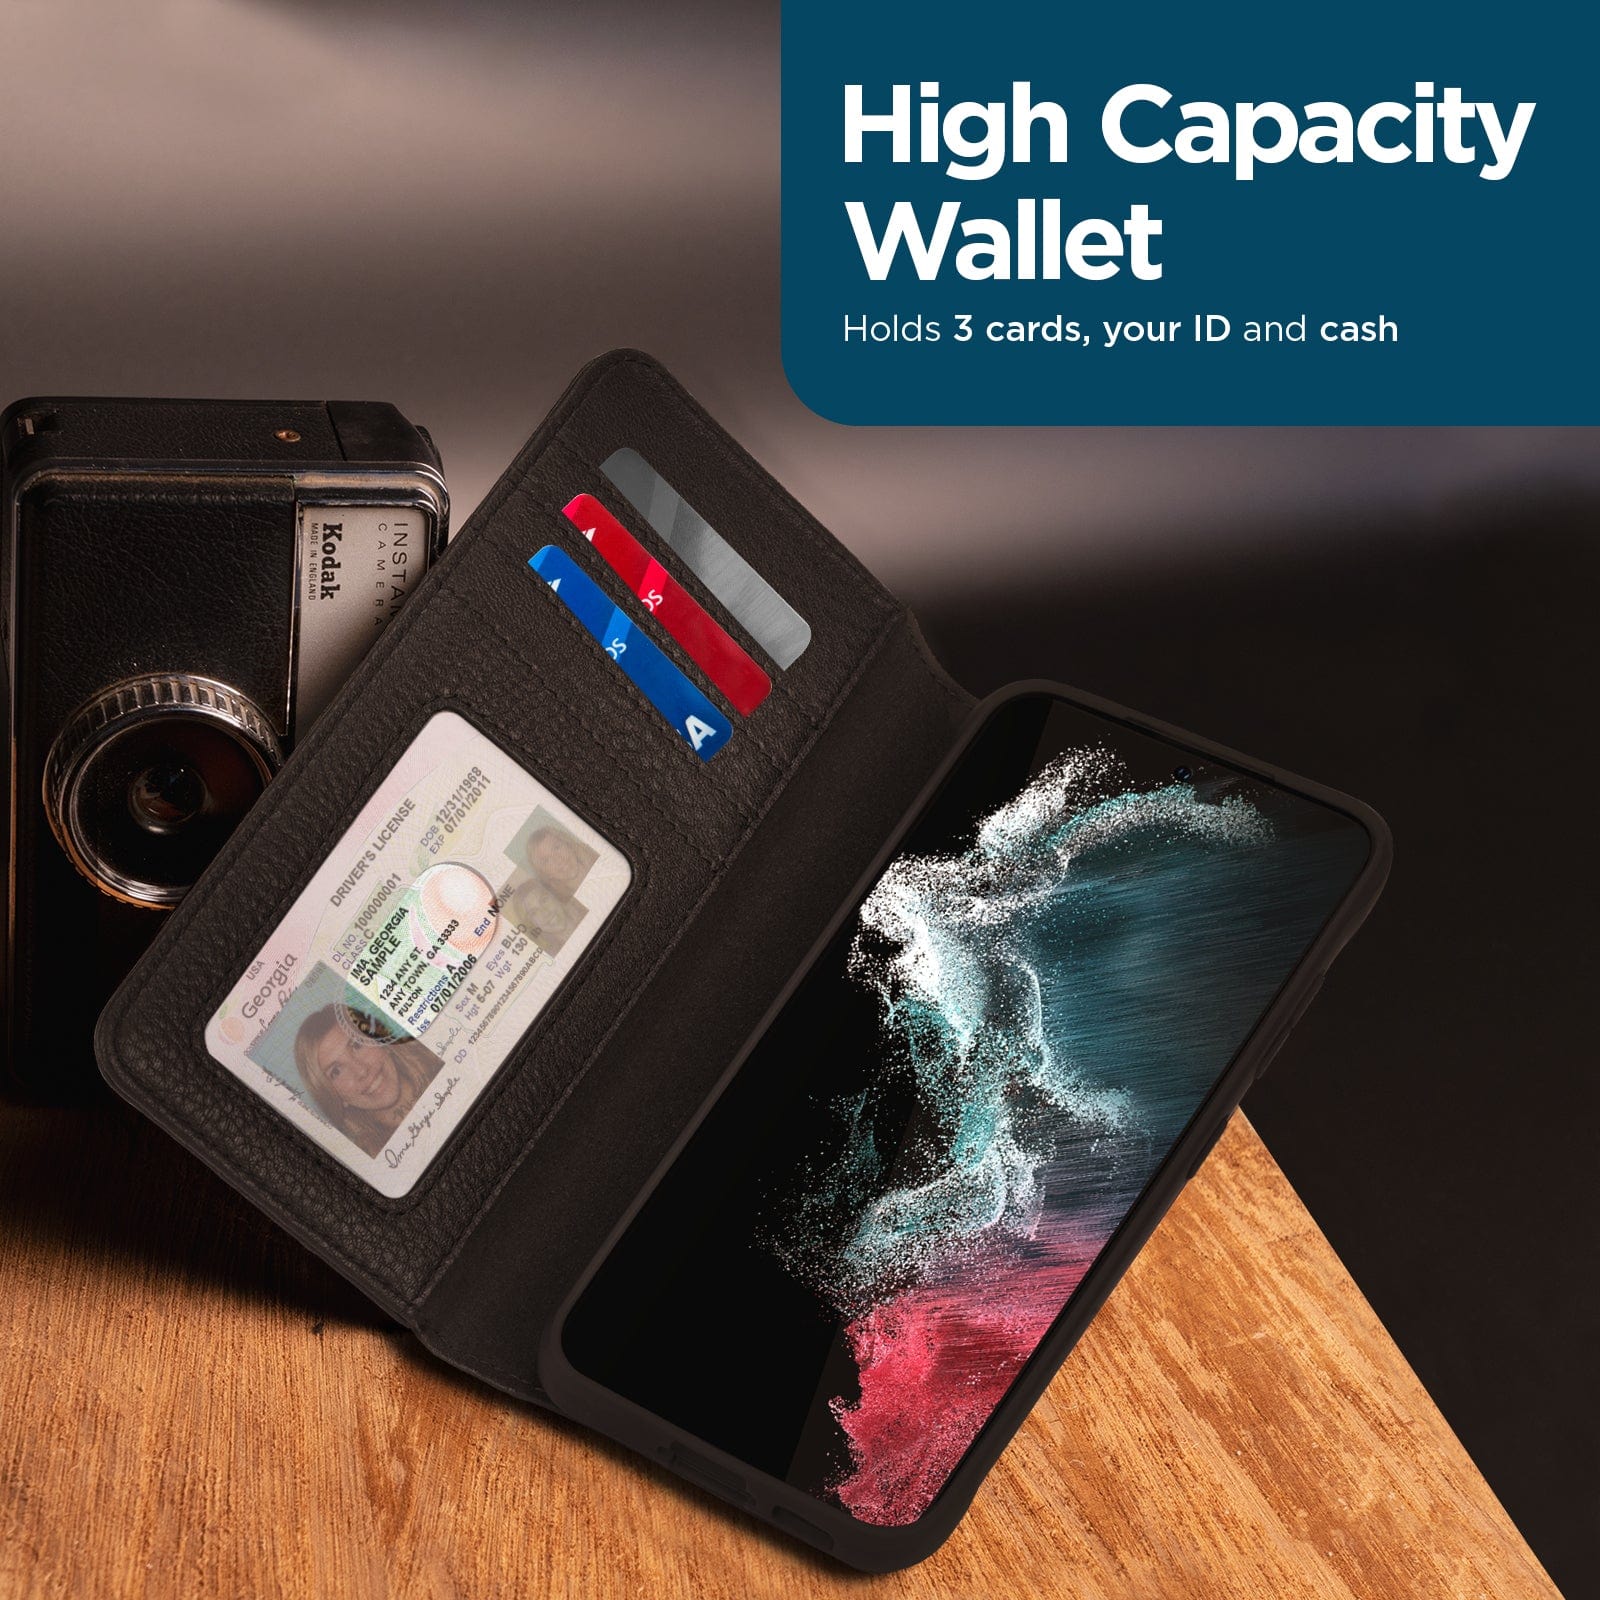 HIGH CAPACITY WALLET HOLDS 3 CARDS, YOUR ID AND CASH